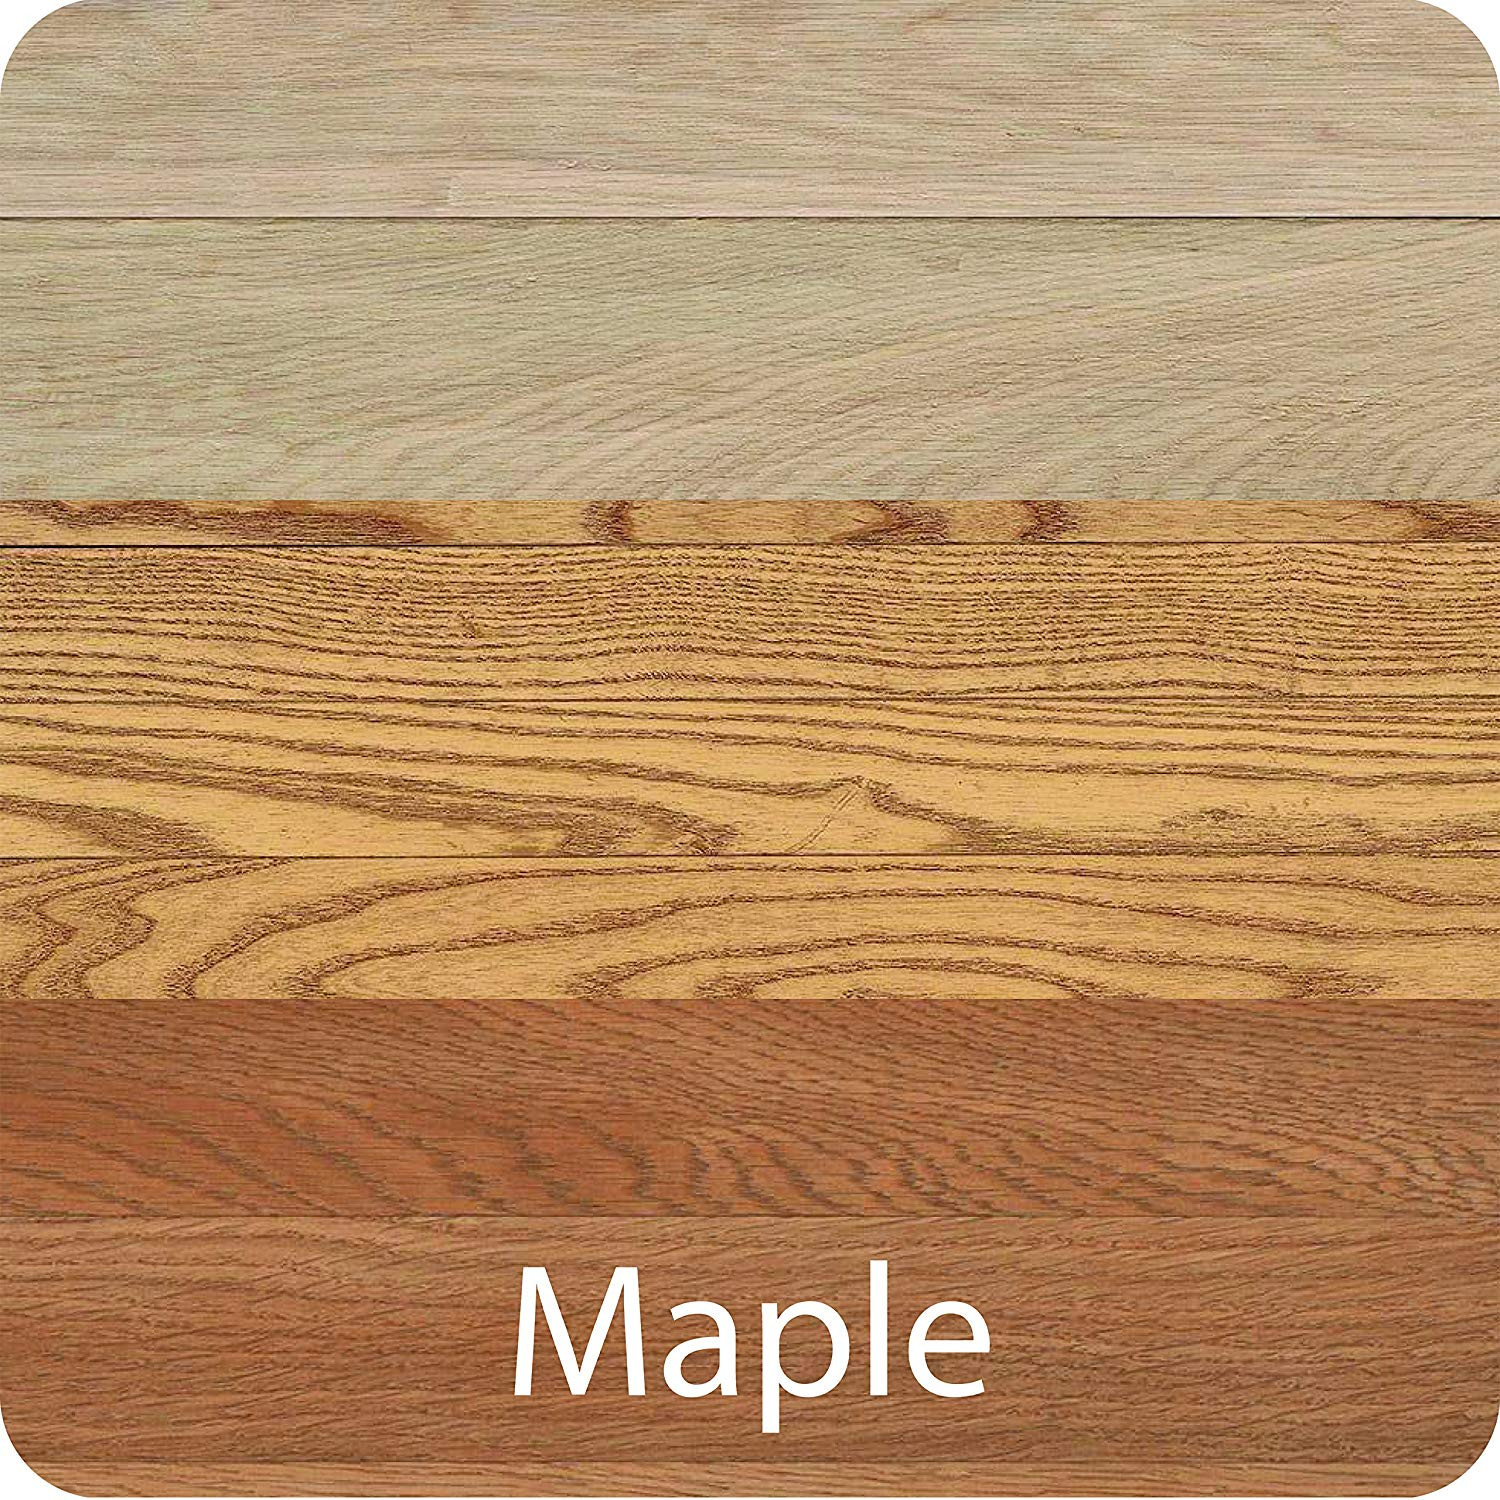 22 Great Hardwood Flooring Business Names 2024 free download hardwood flooring business names of cal flor pe49402cf scratchcure 3 shade double tipped repair pen for inside cal flor pe49402cf scratchcure 3 shade double tipped repair pen for use on wood